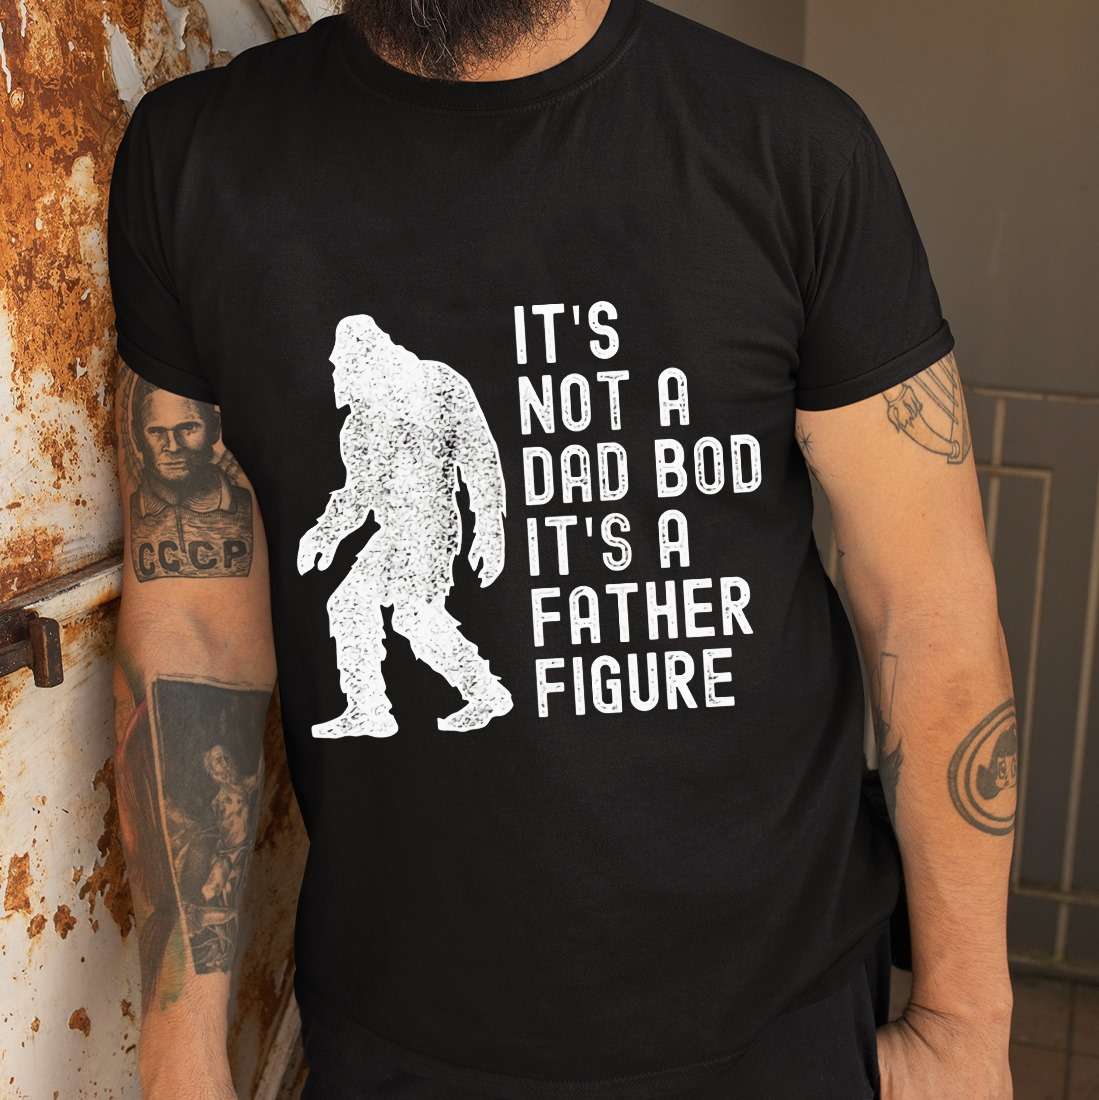 It's not a dad bod It's a father figure - Father's day gift, bigfoot halloween costume